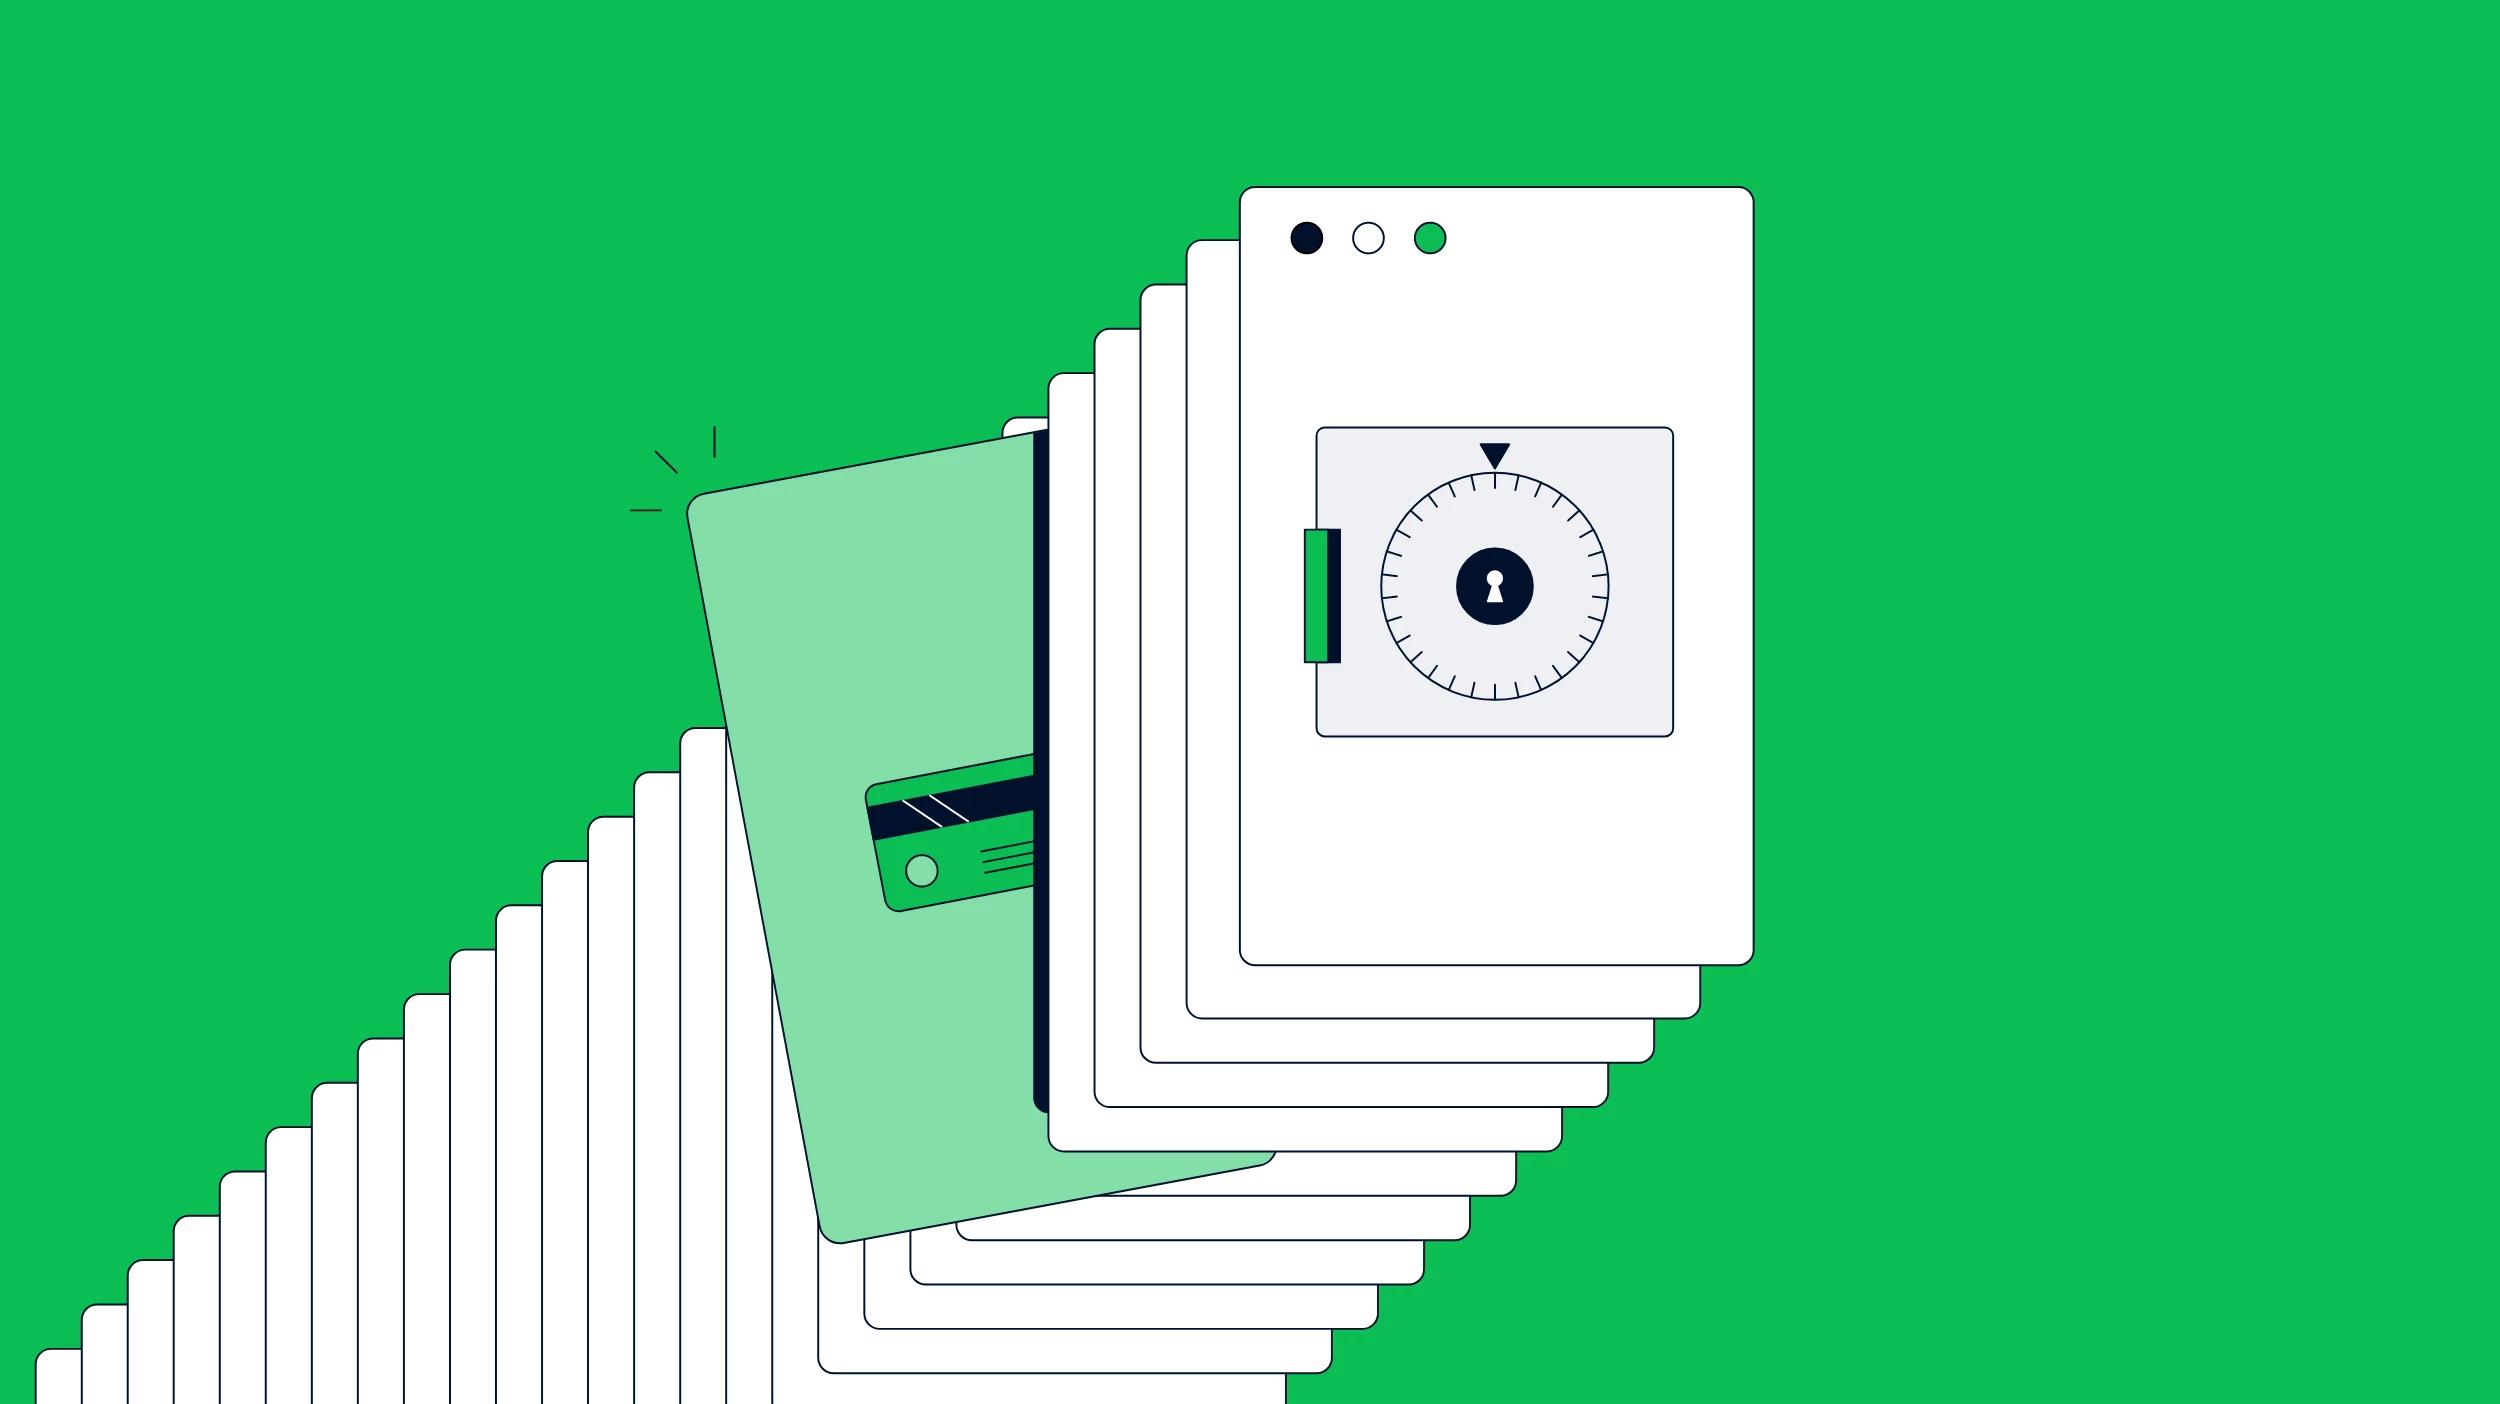 Card-on-file with Adyen